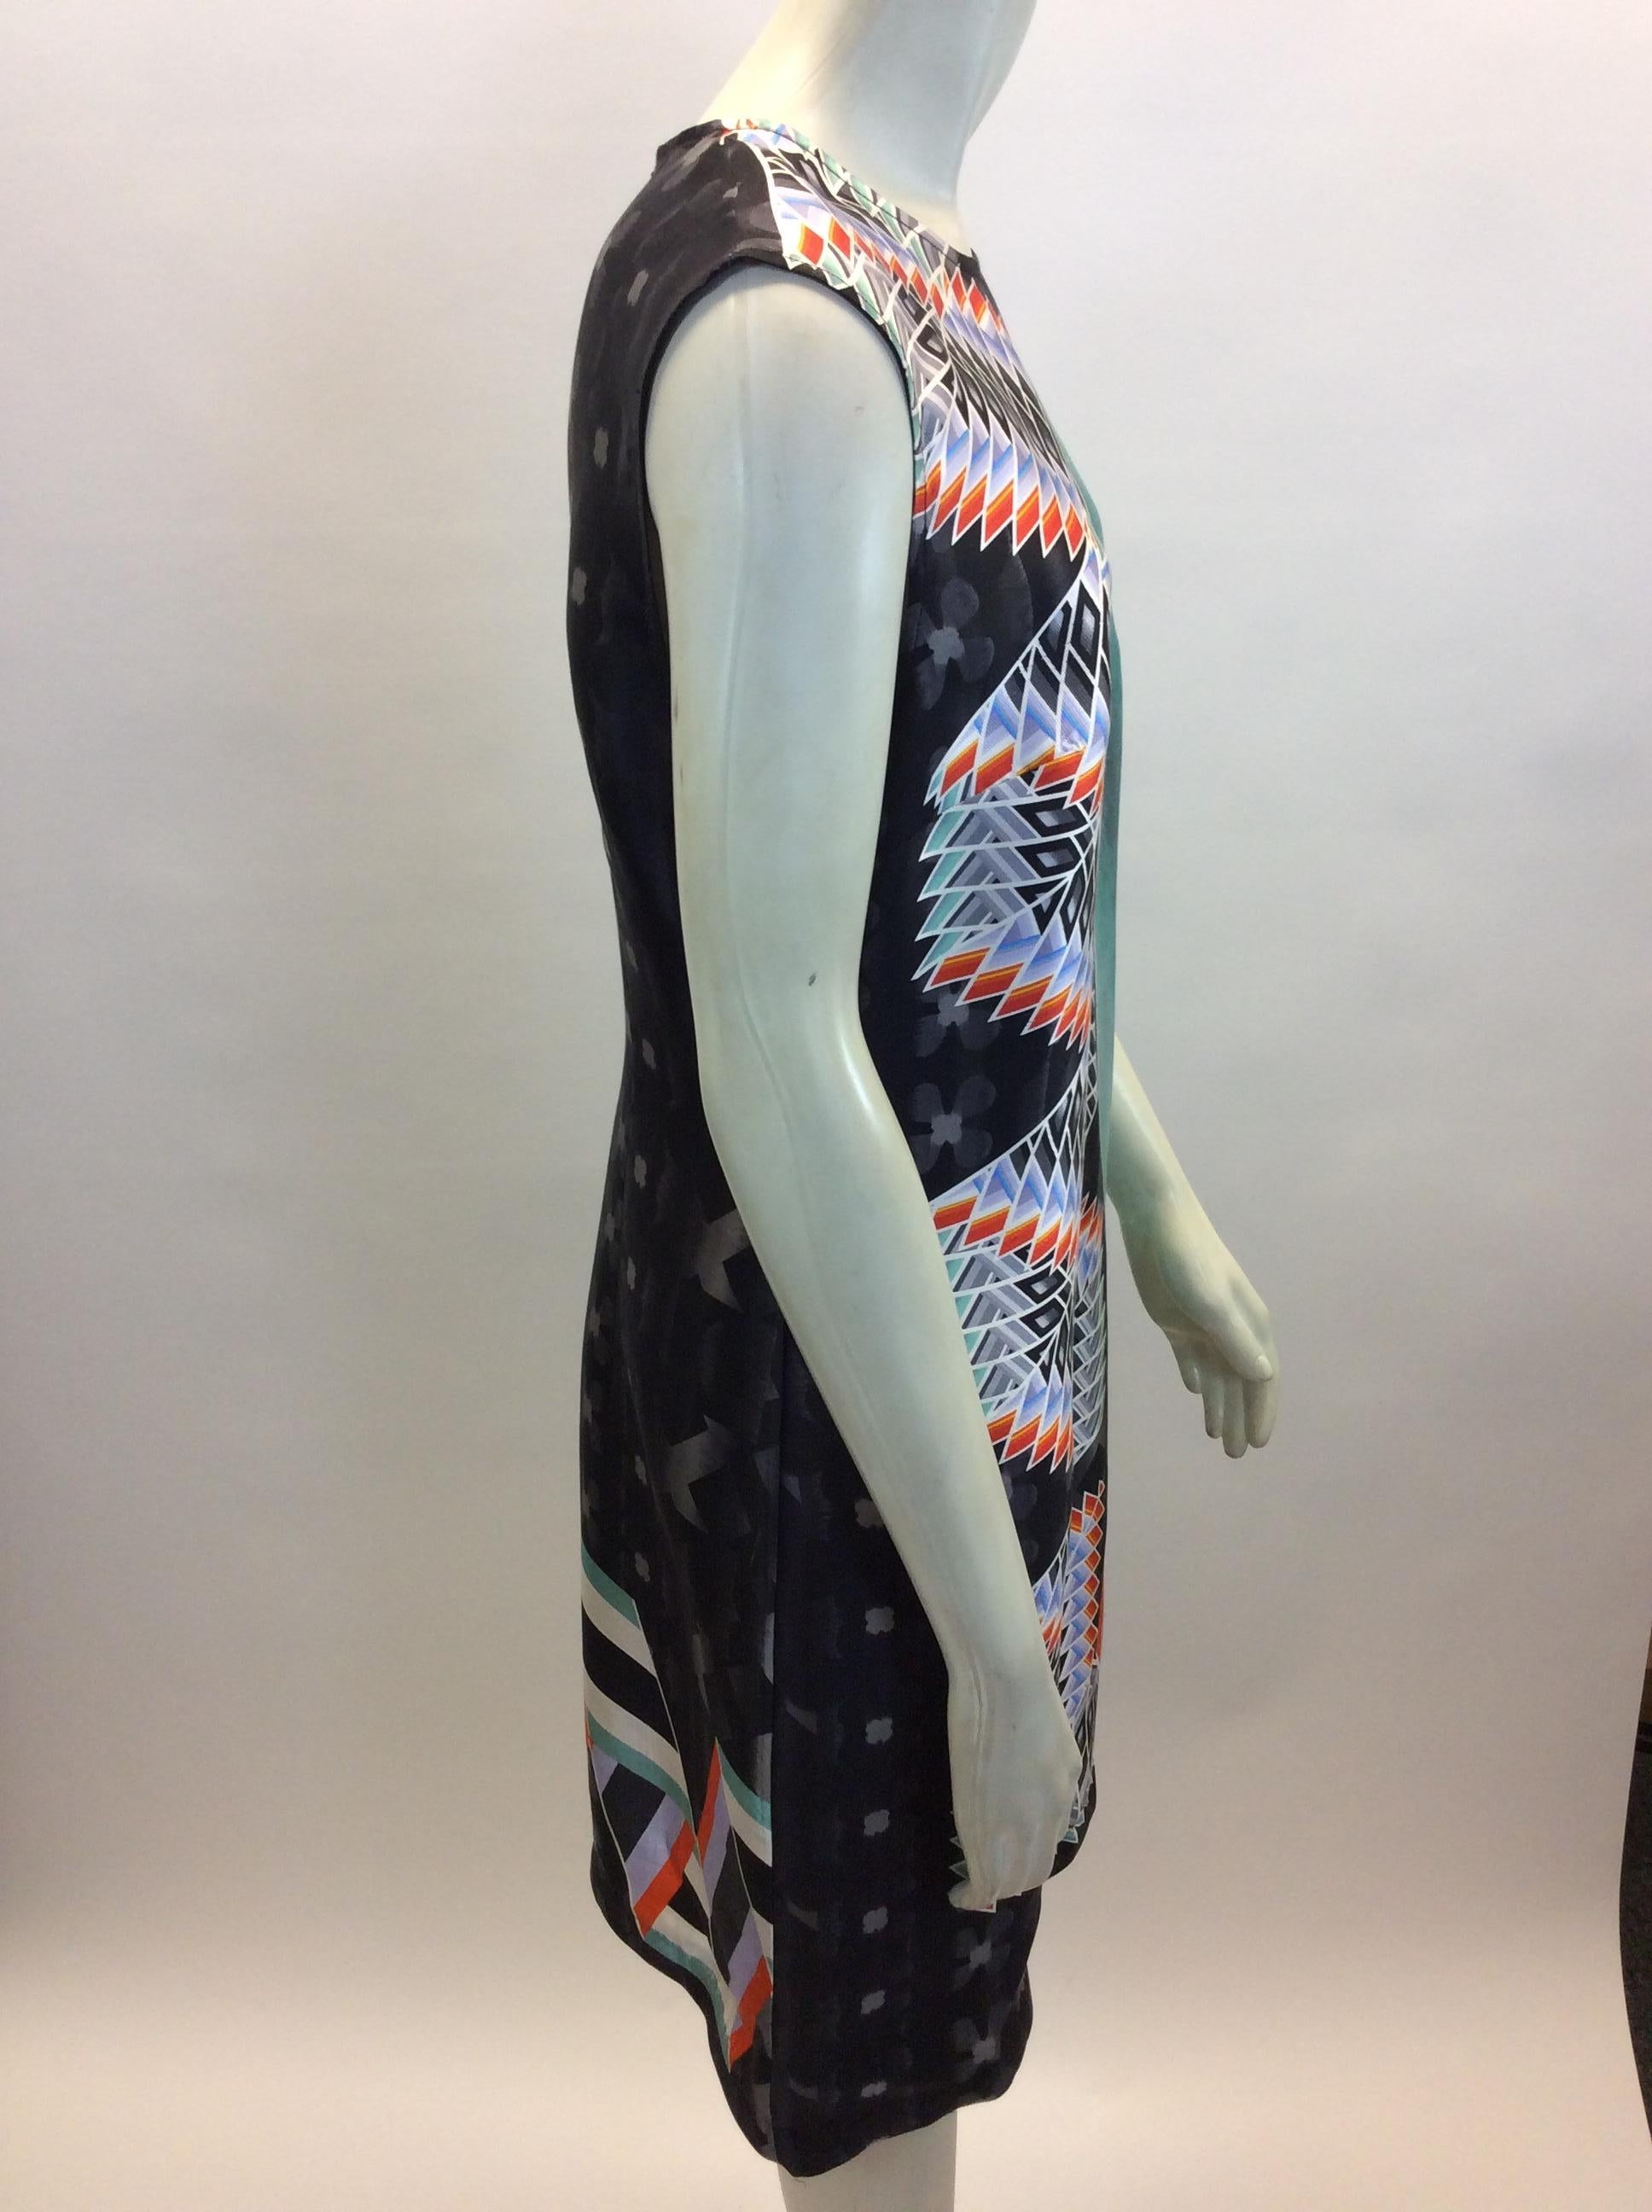 Peter Pilotto Multi-Color Print Silk Dress In Good Condition For Sale In Narberth, PA